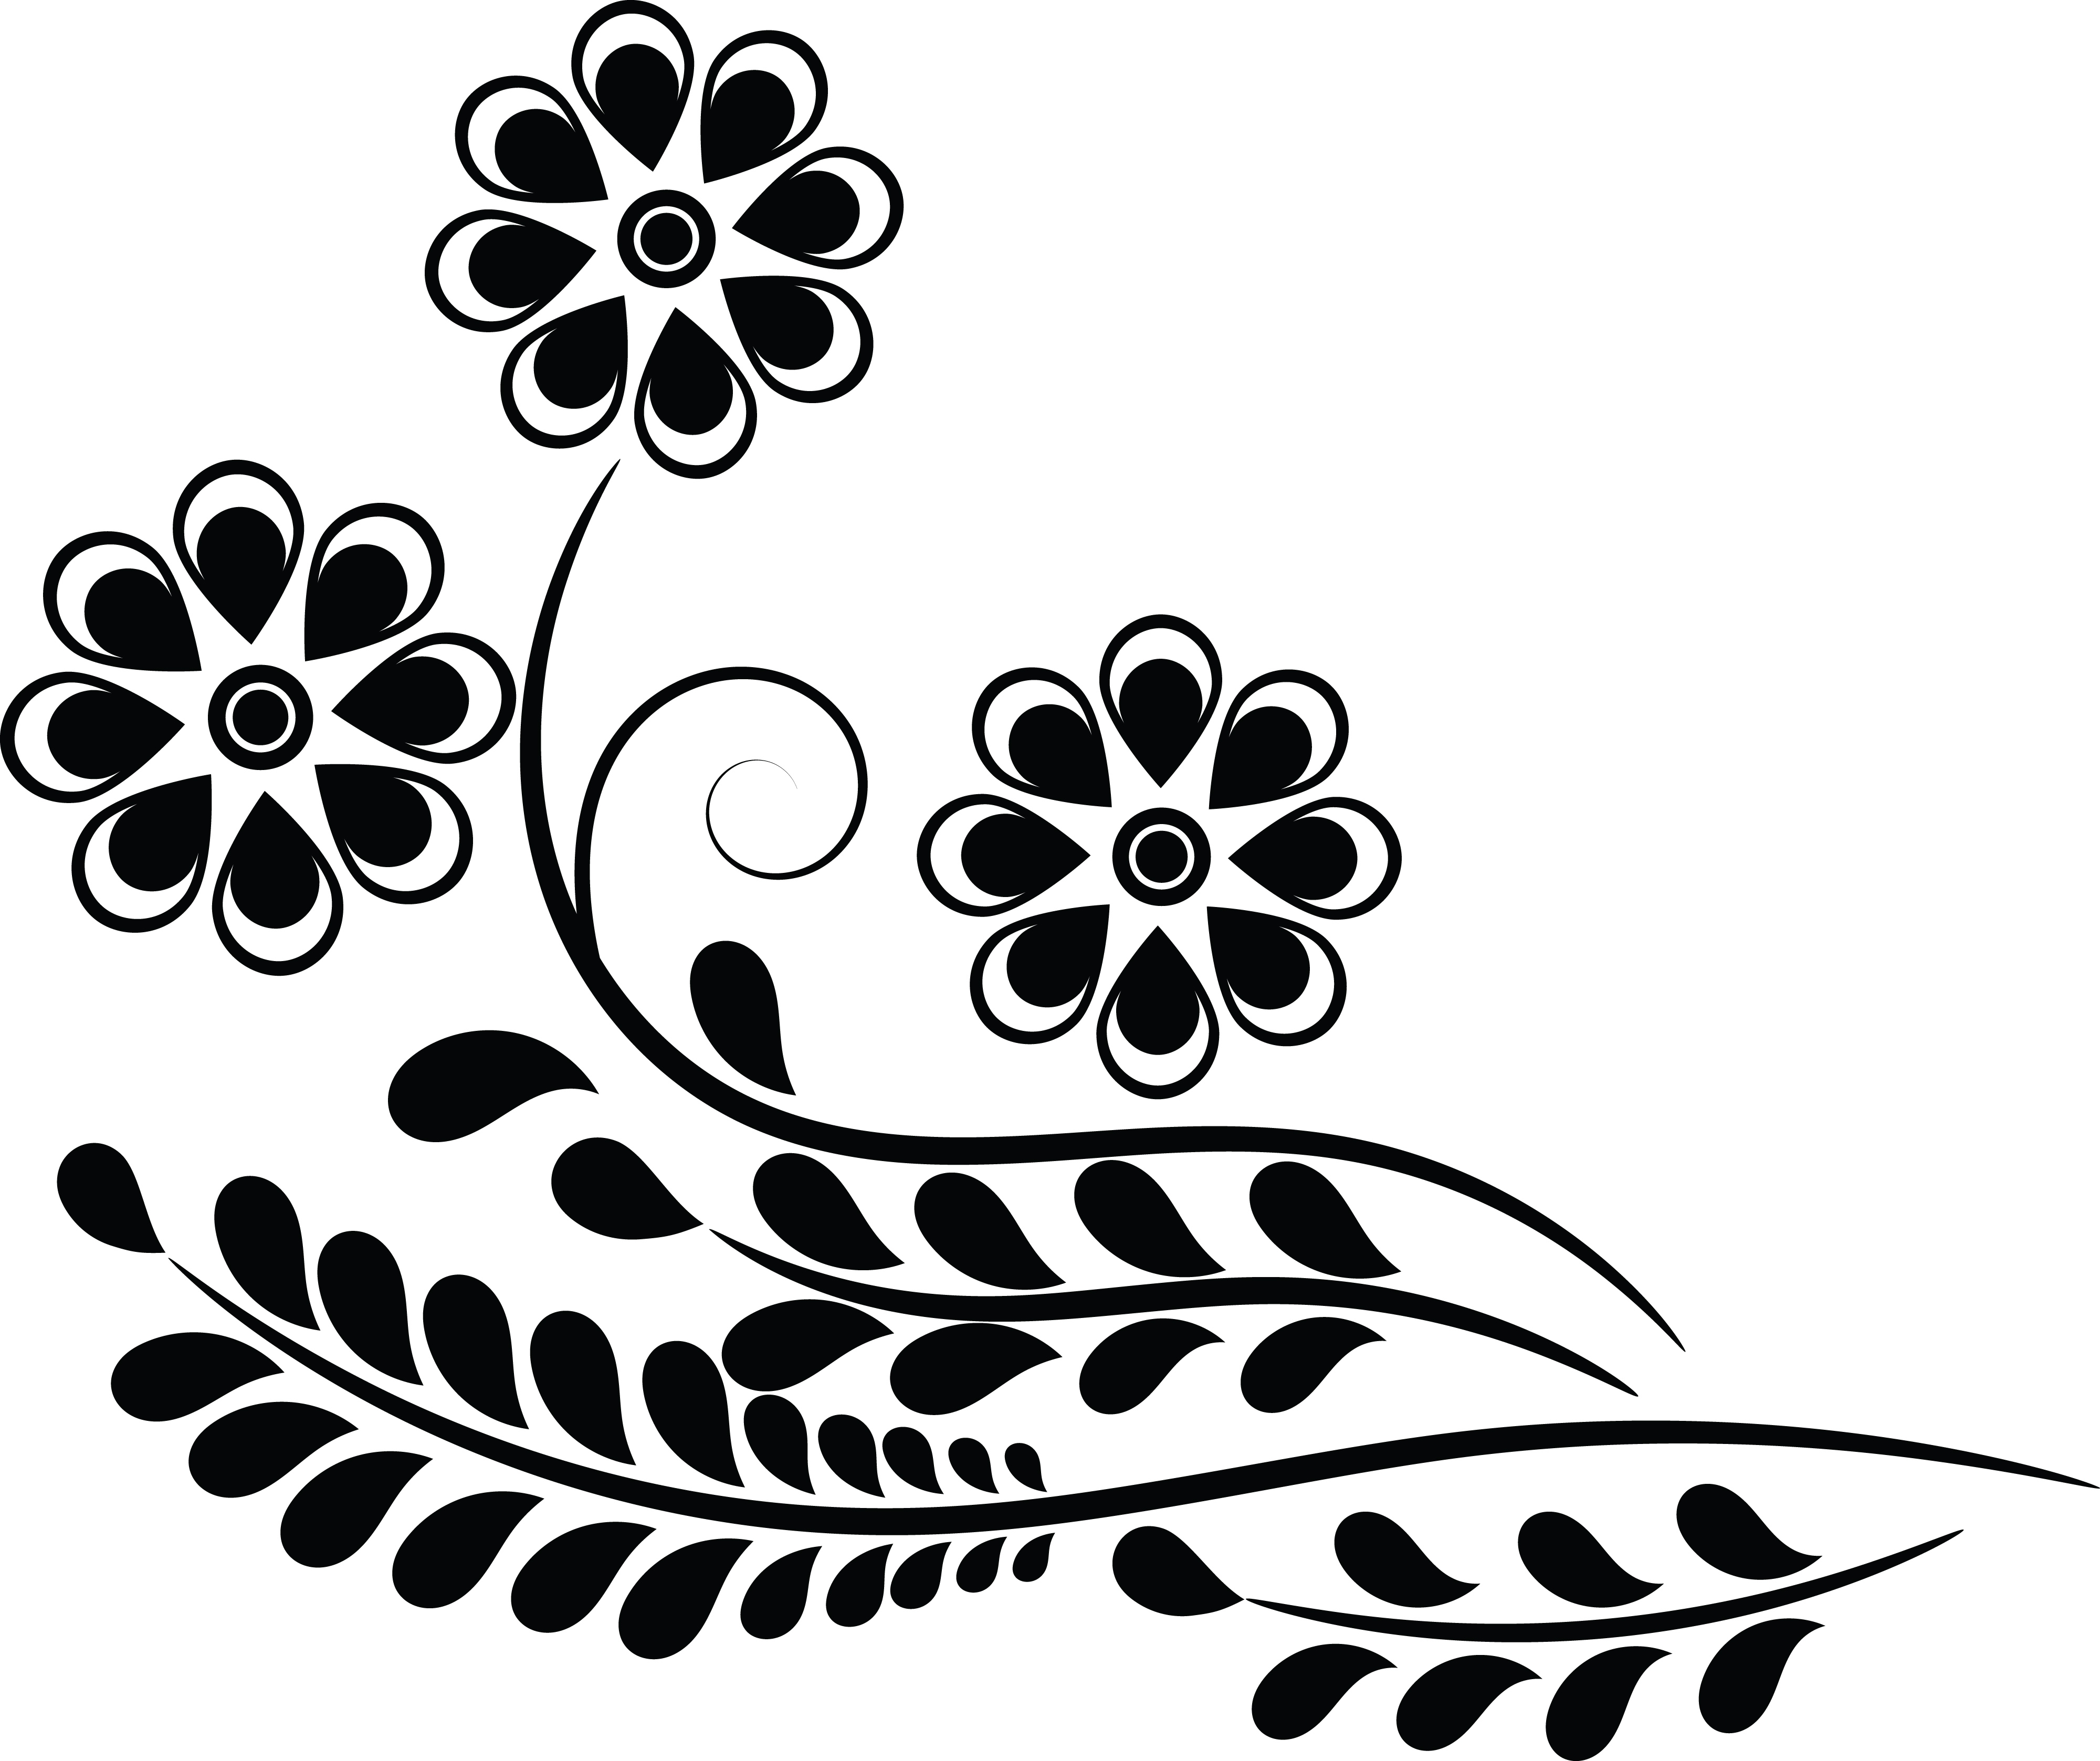 Free Clipart Of A flower design.